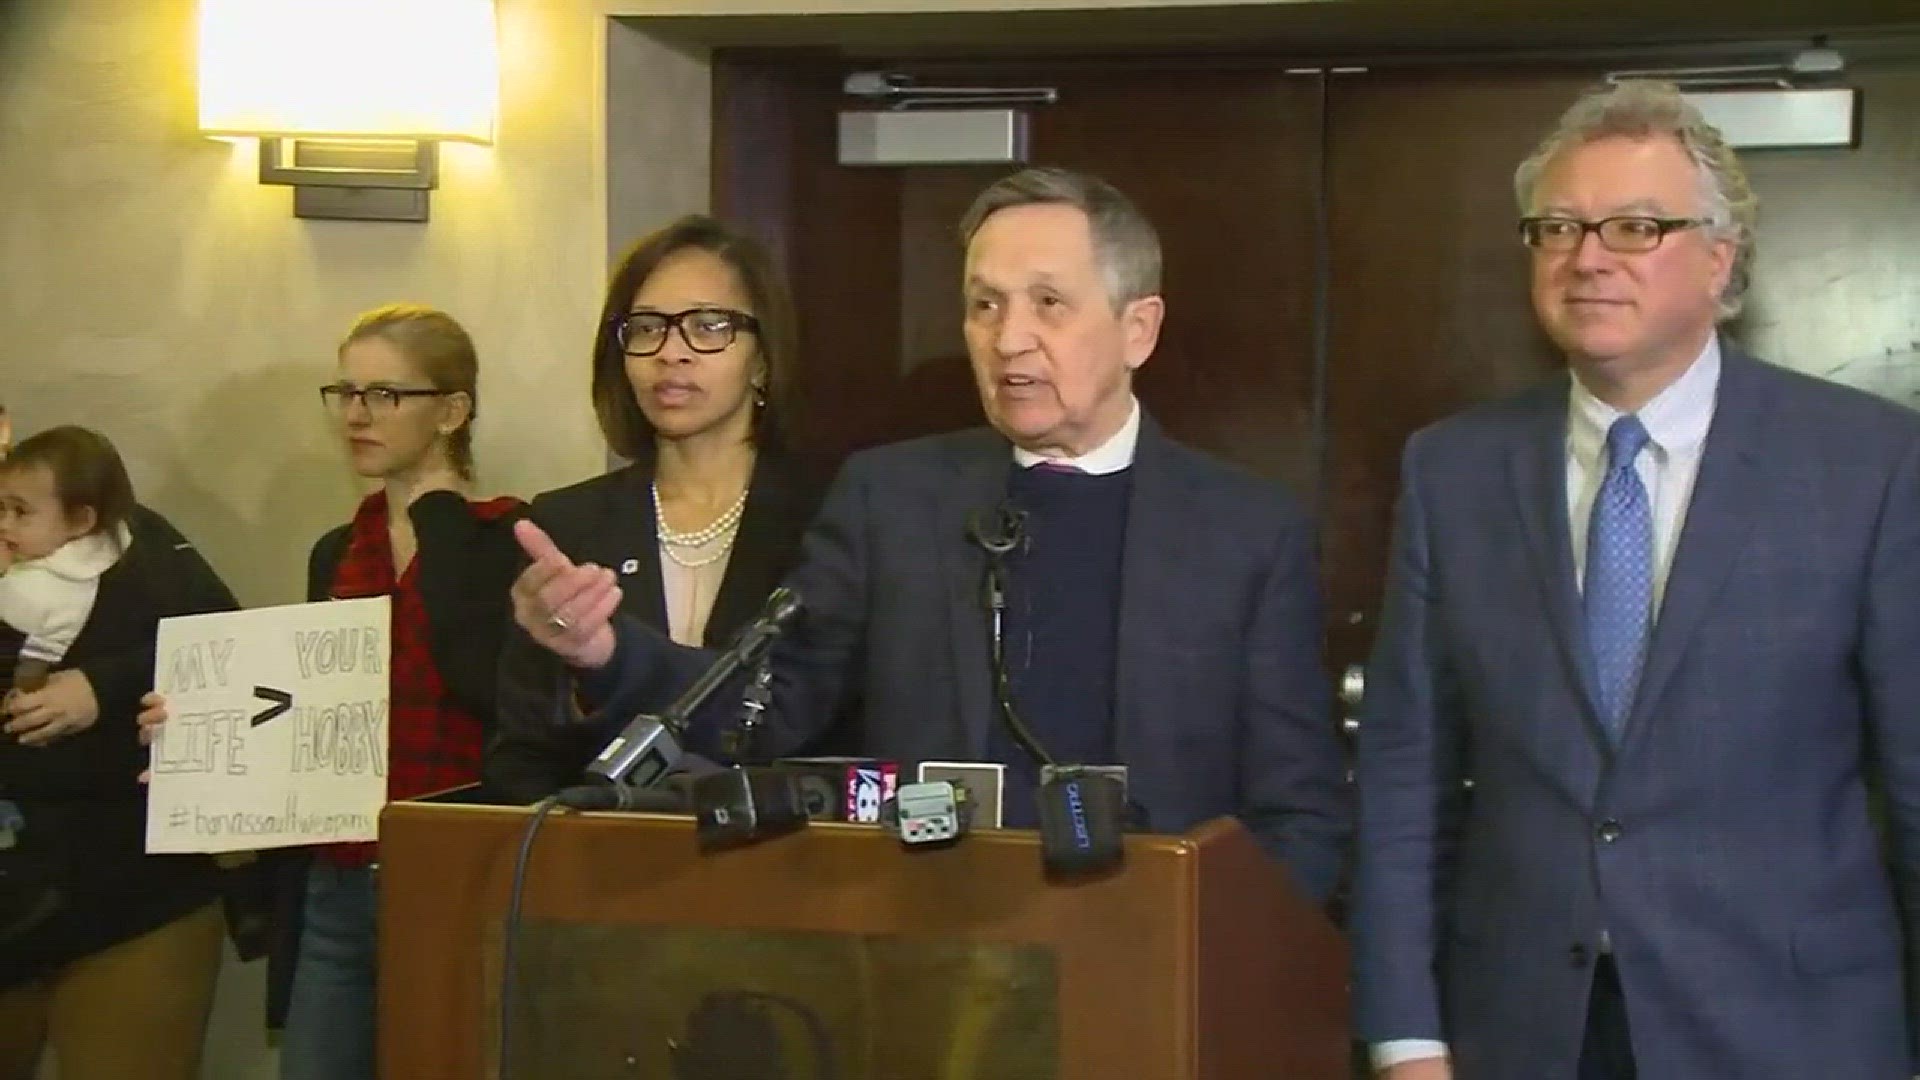 Kucinich visited Cleveland to hold a rally to call for the statewide ban of assault weapons.